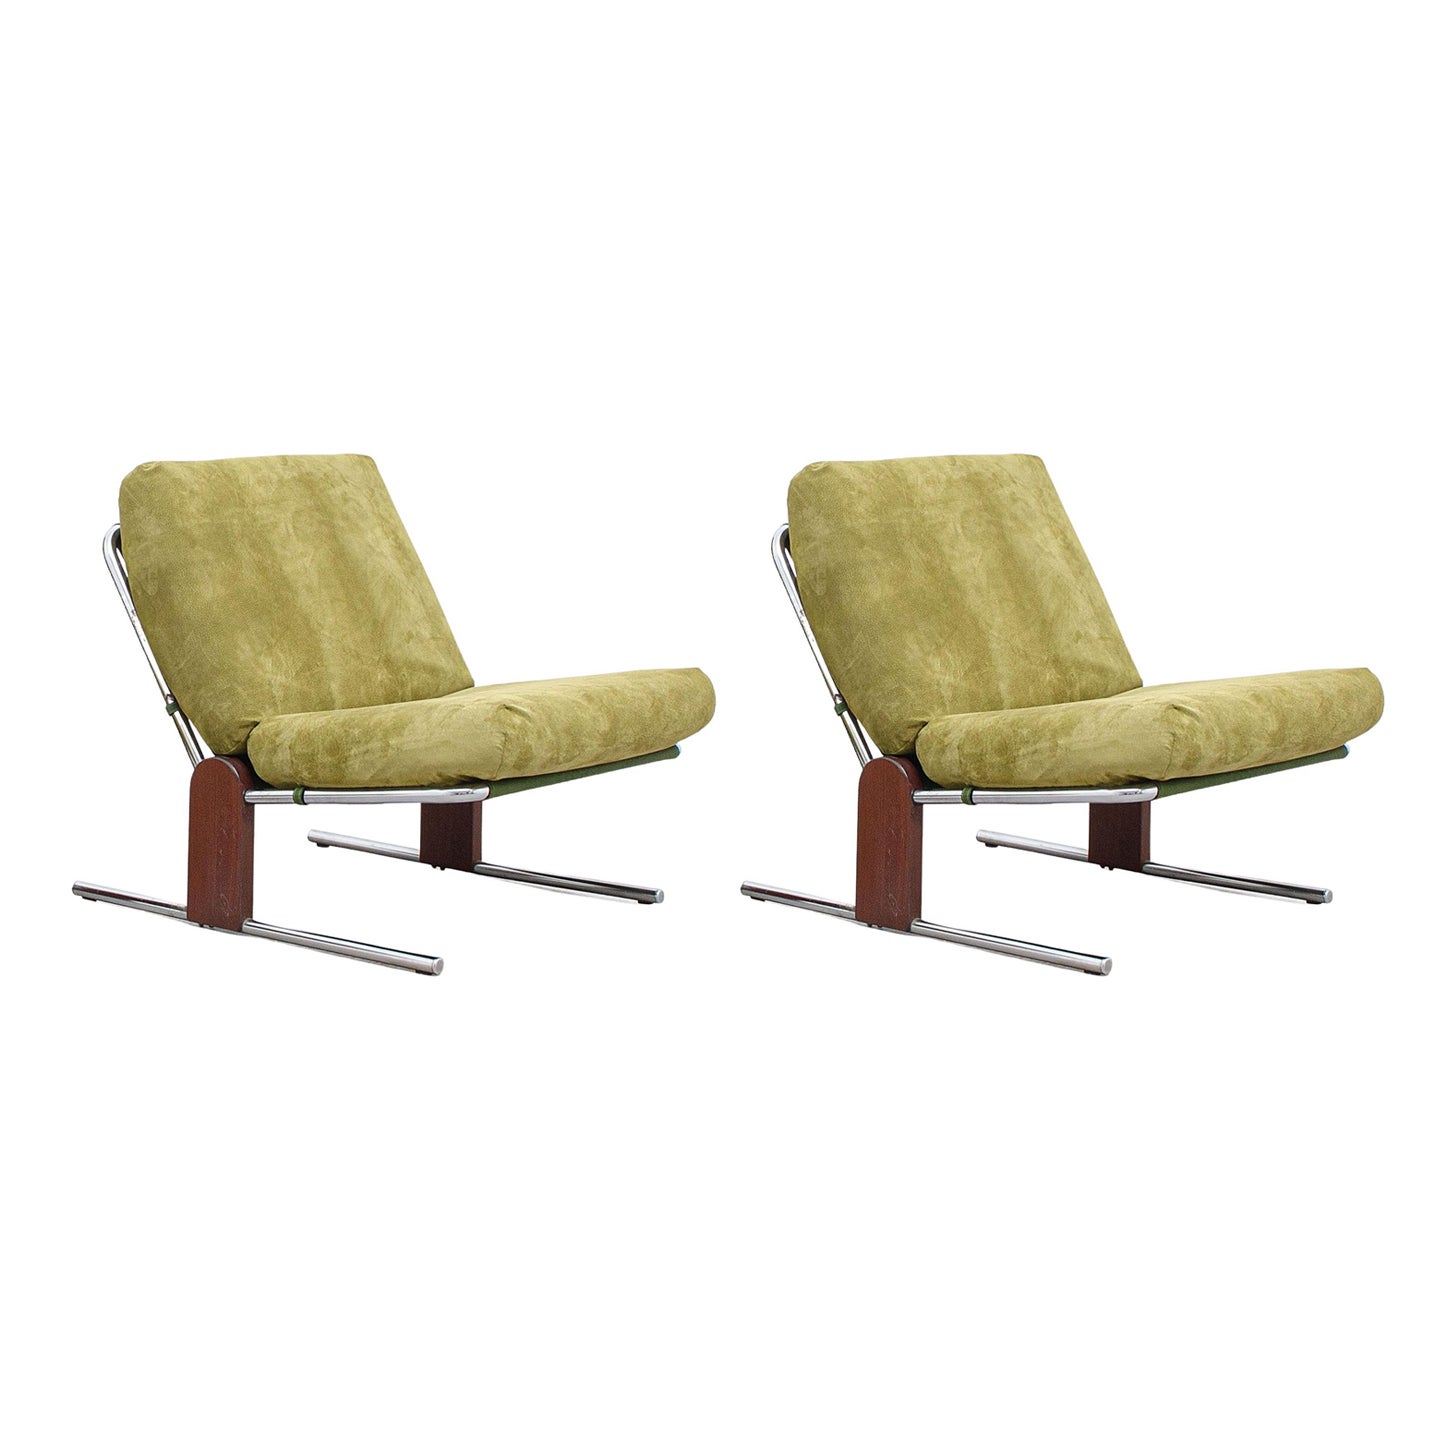 Pair of Rare Lounge Chairs, by Percival Lafer, Brazilian Mid-Century Modern